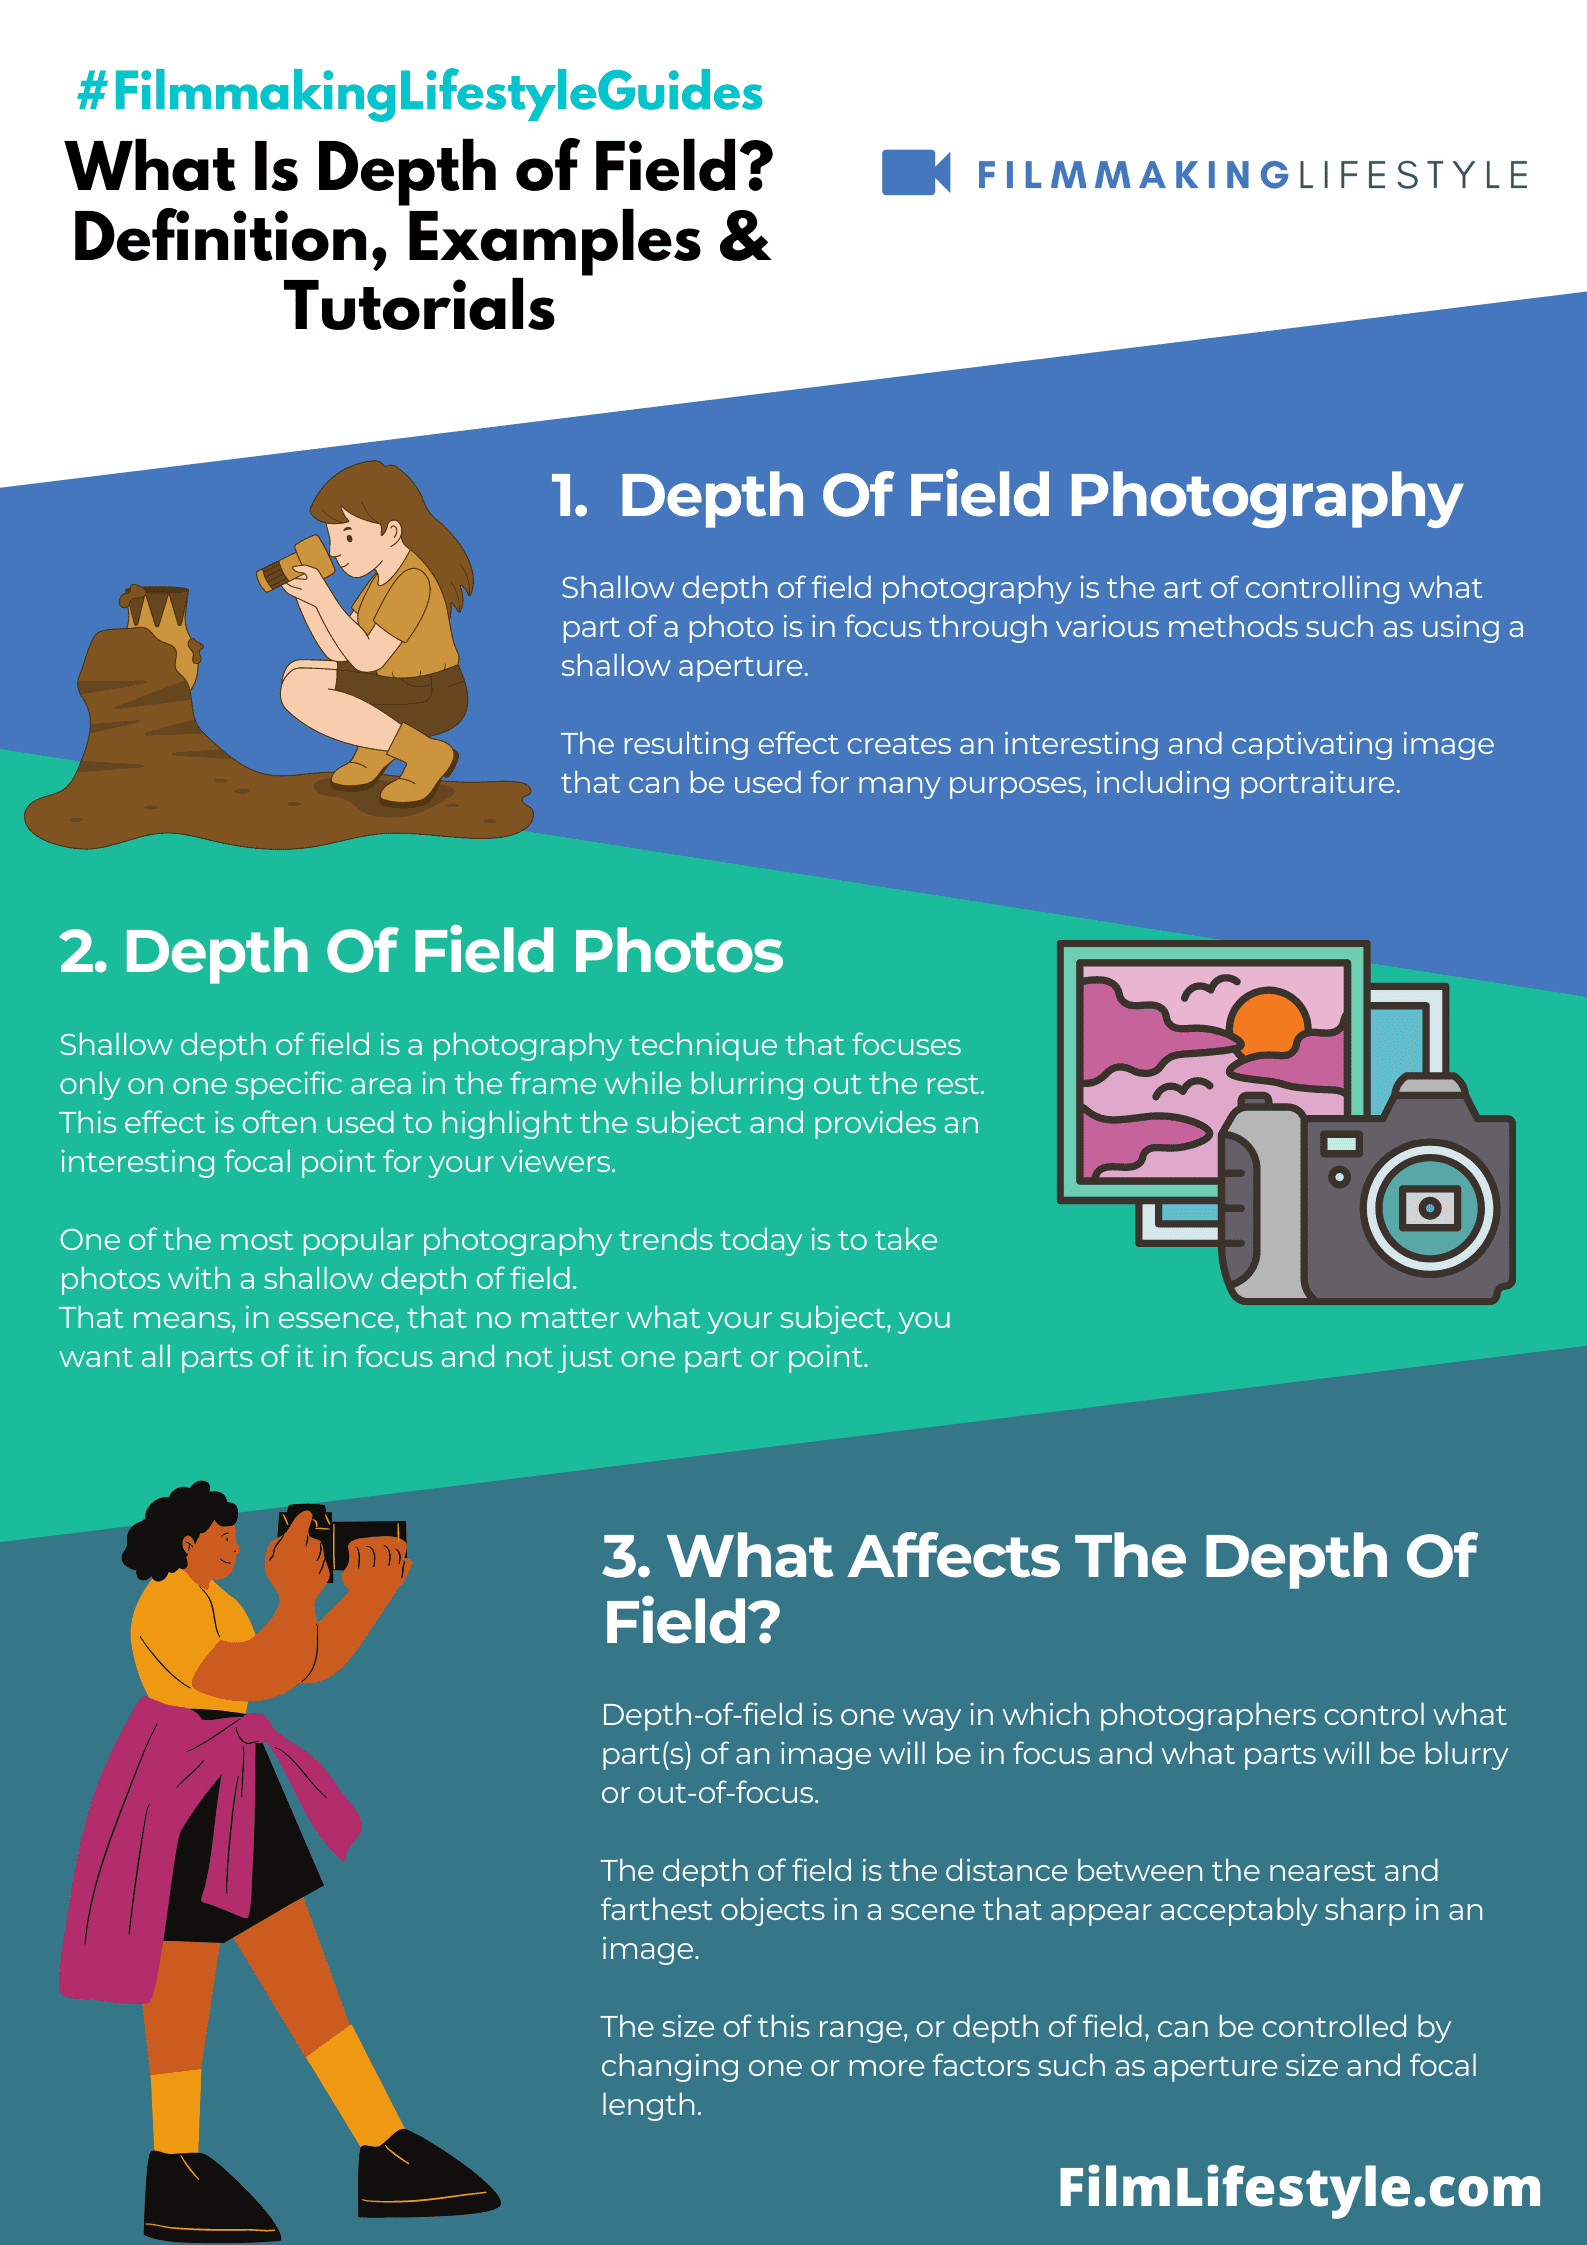 What Is Depth of Field